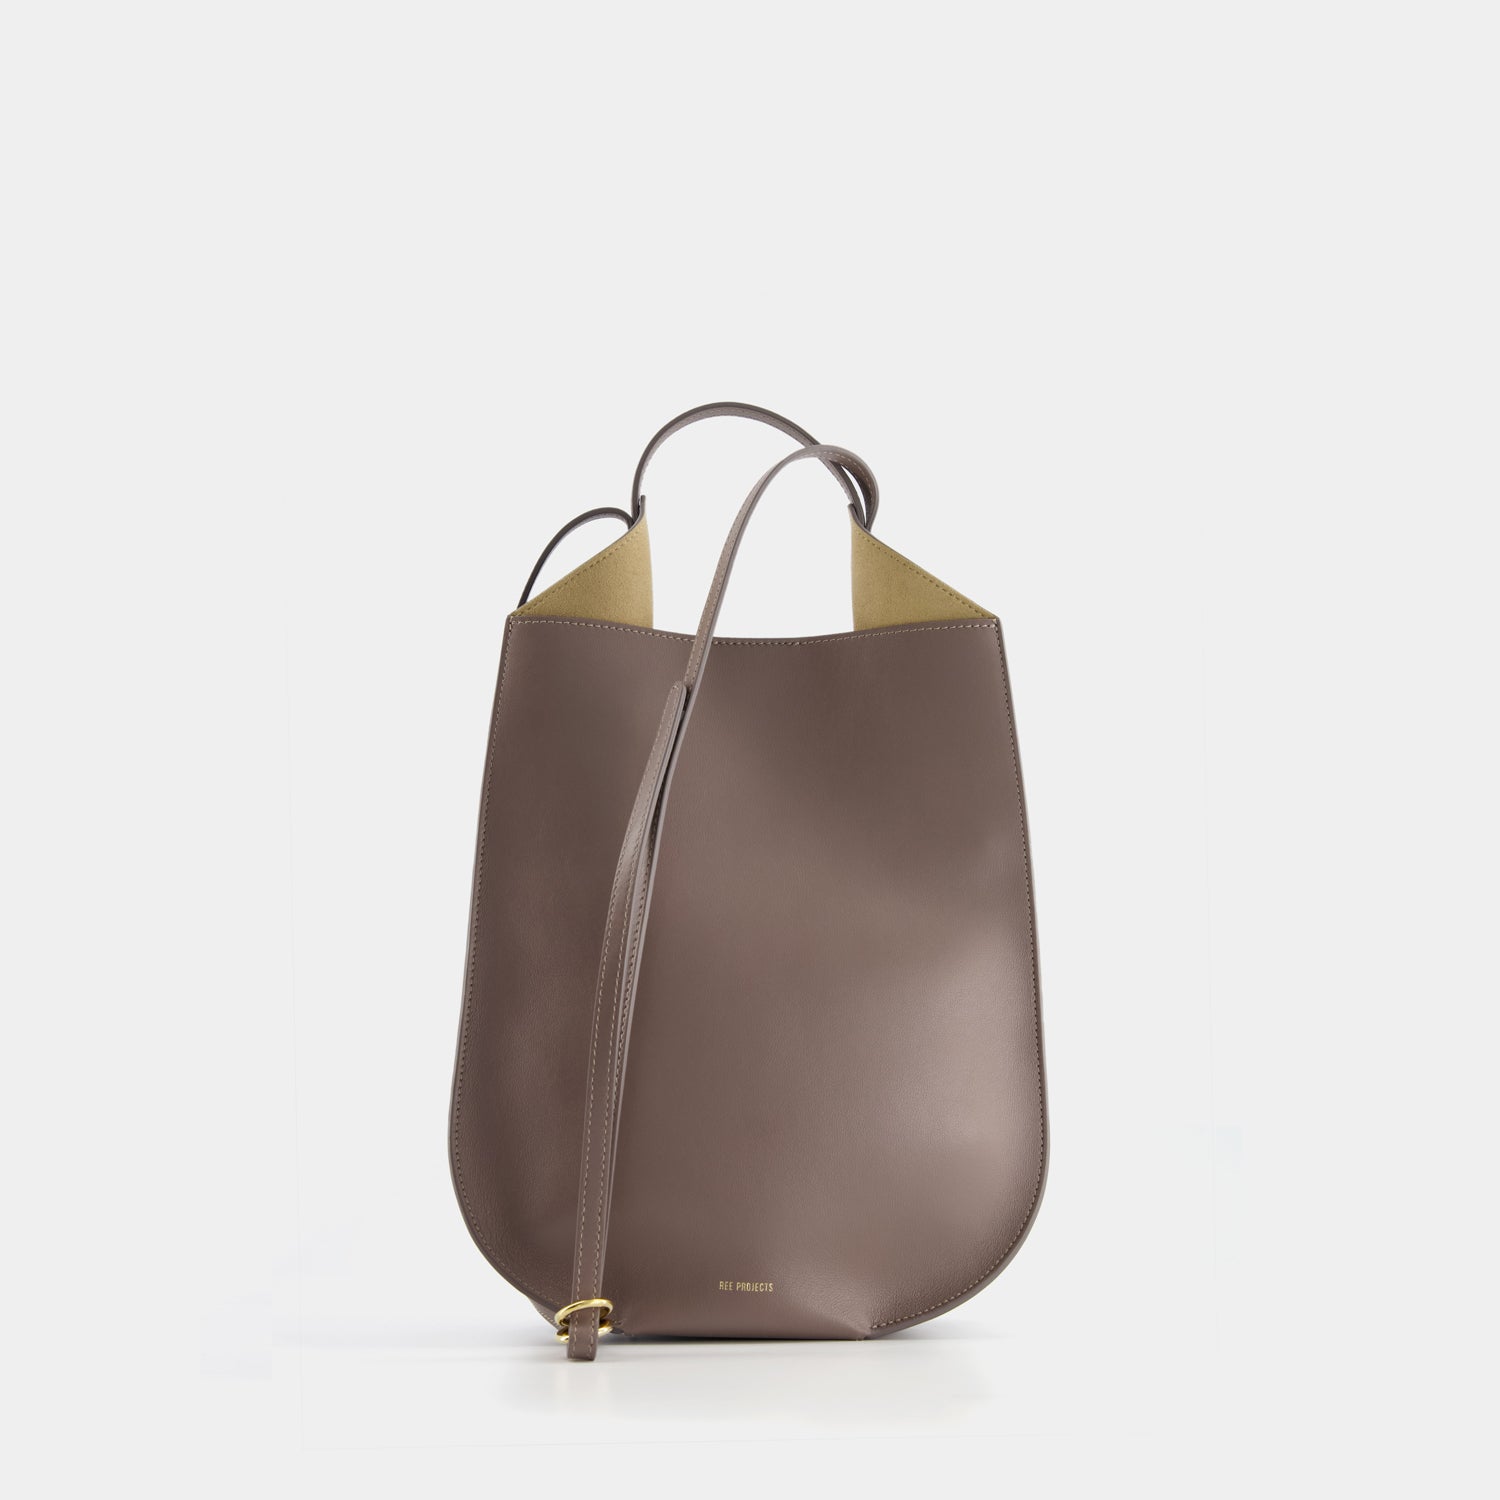 Aesther Ekme Mini Sac Smooth Leather Top Handle Bag In Fallen Rock